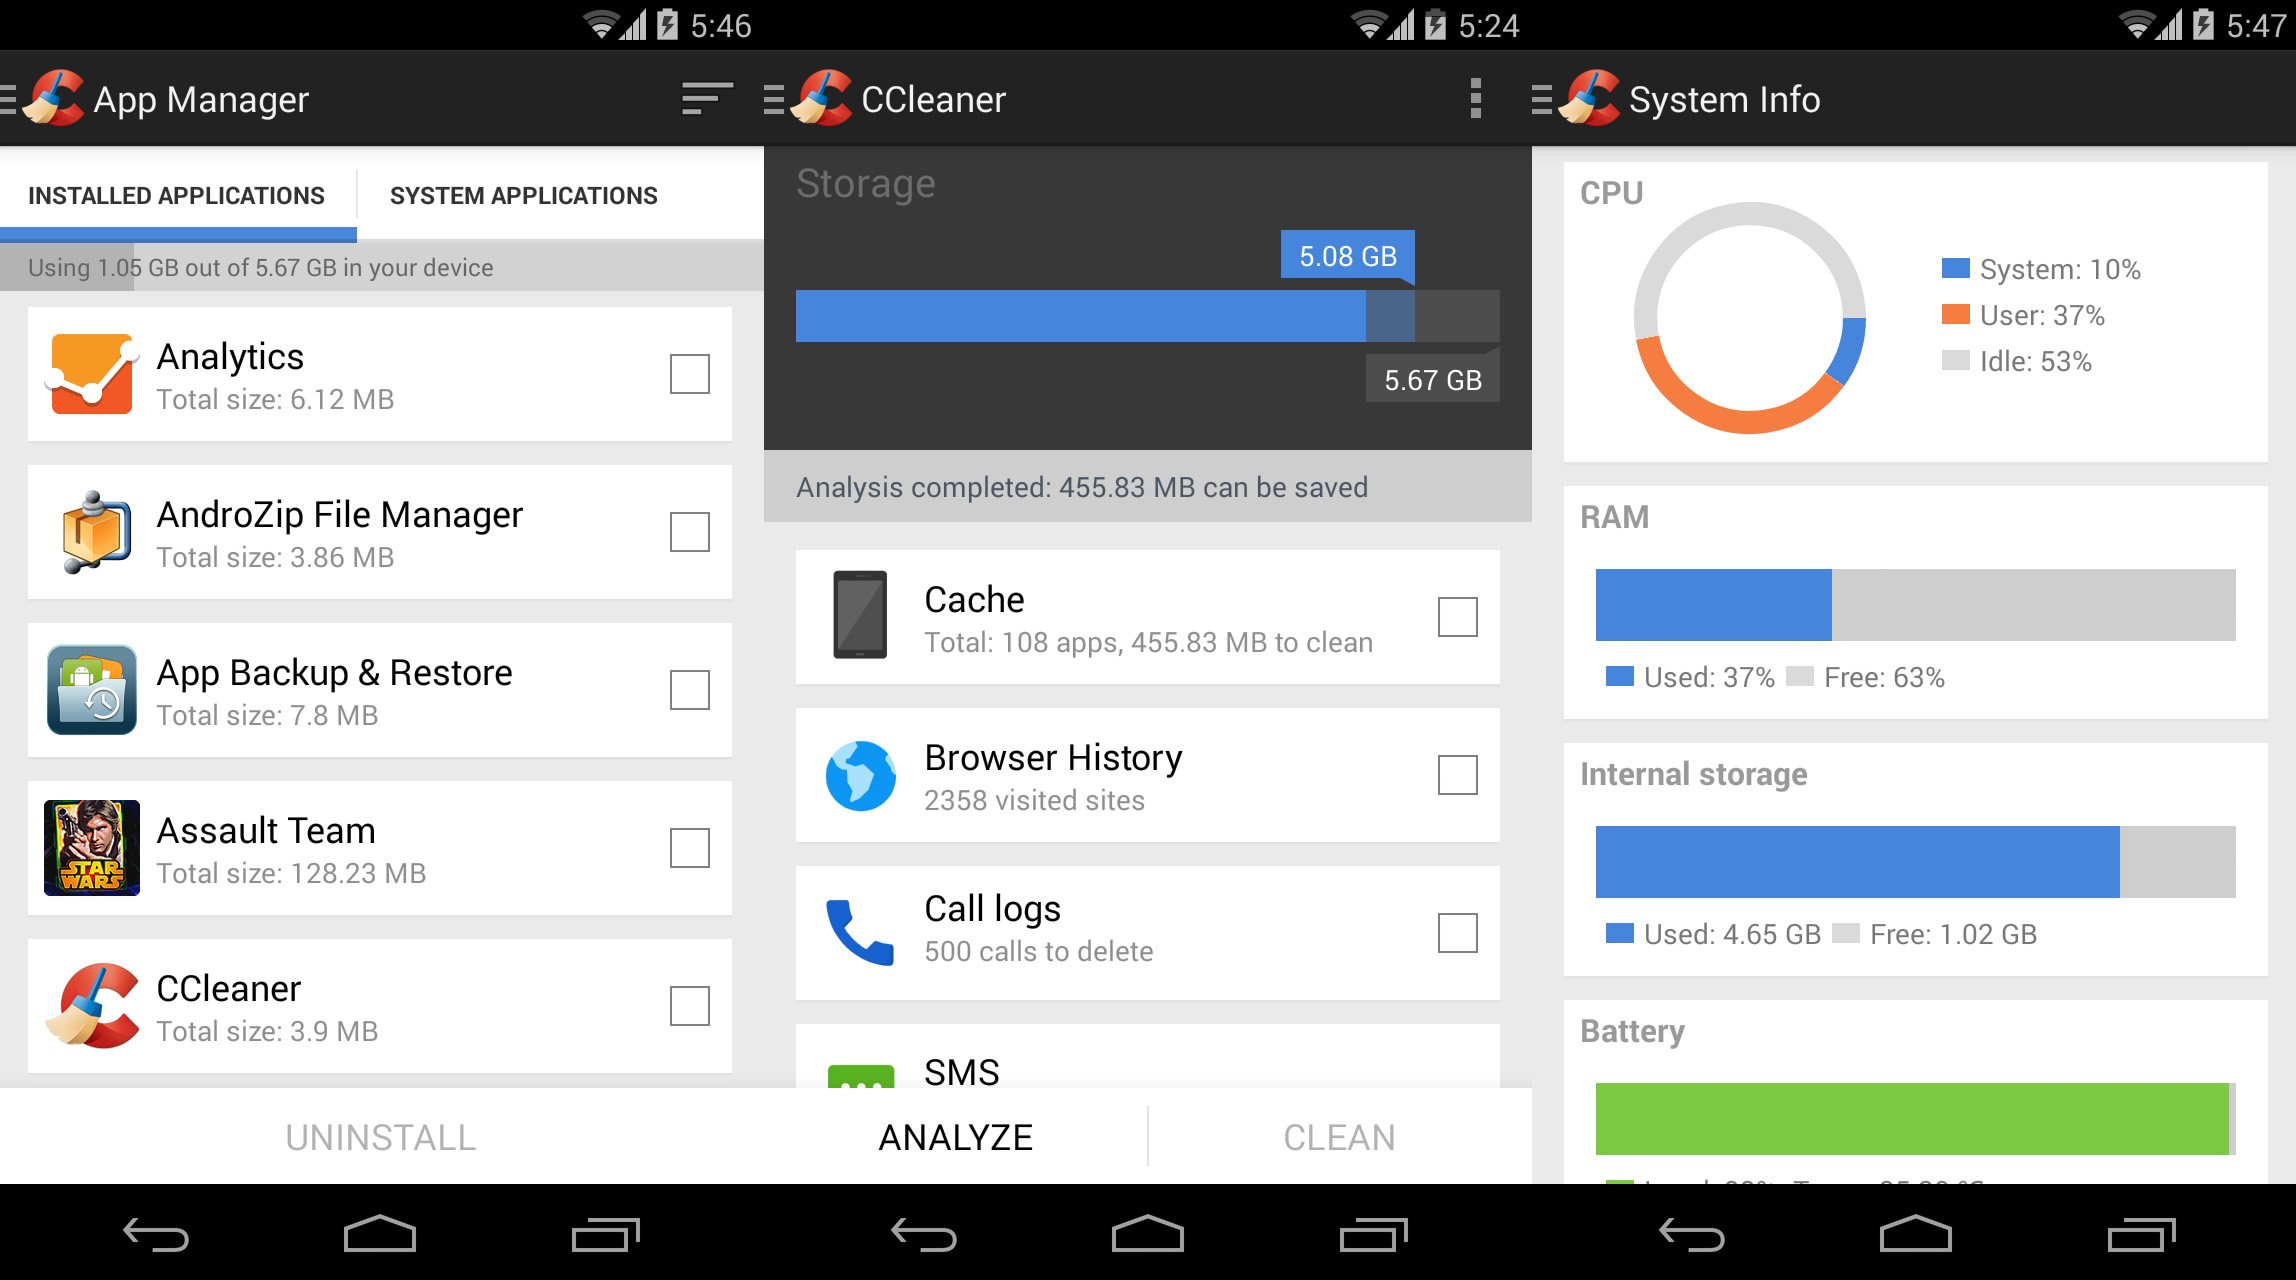 Ccleaner free download for pc windows xp - Mobile micromx descargar ccleaner para windows 10 32 bits found this phone